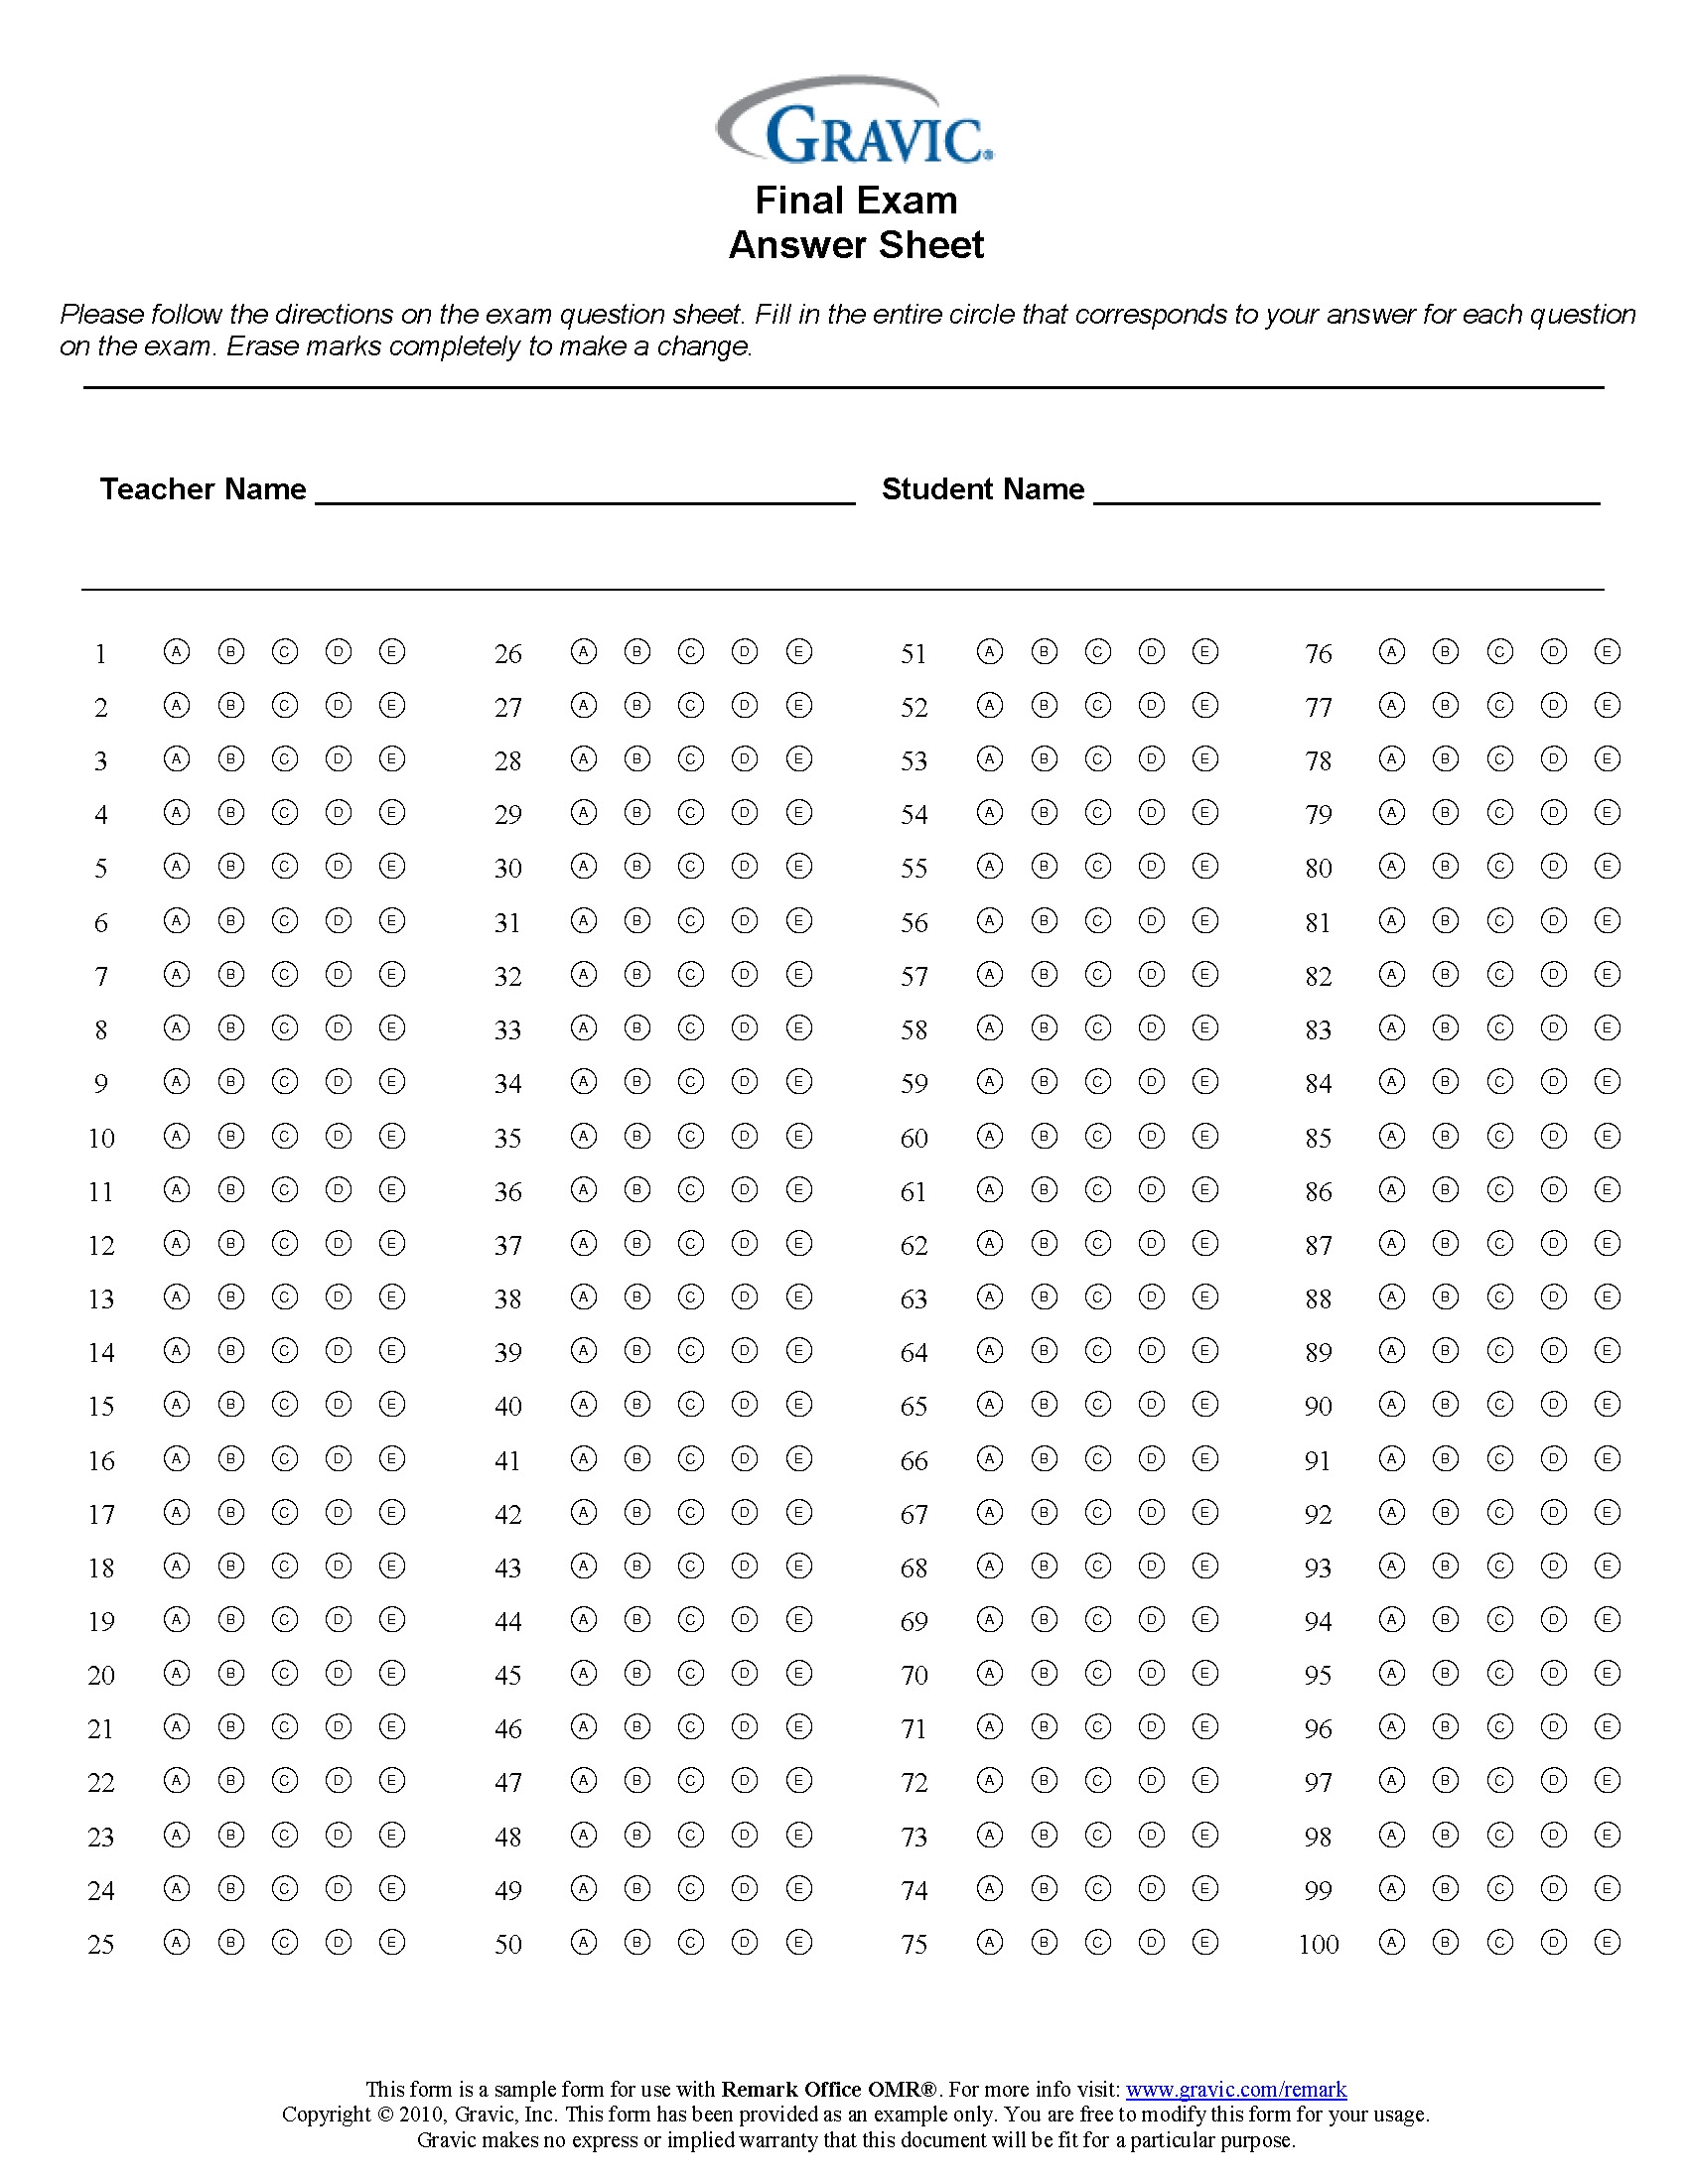 Final Exam 100 Question Test Answer Sheet Remark Software - Free Printable Bubble Answer Sheets